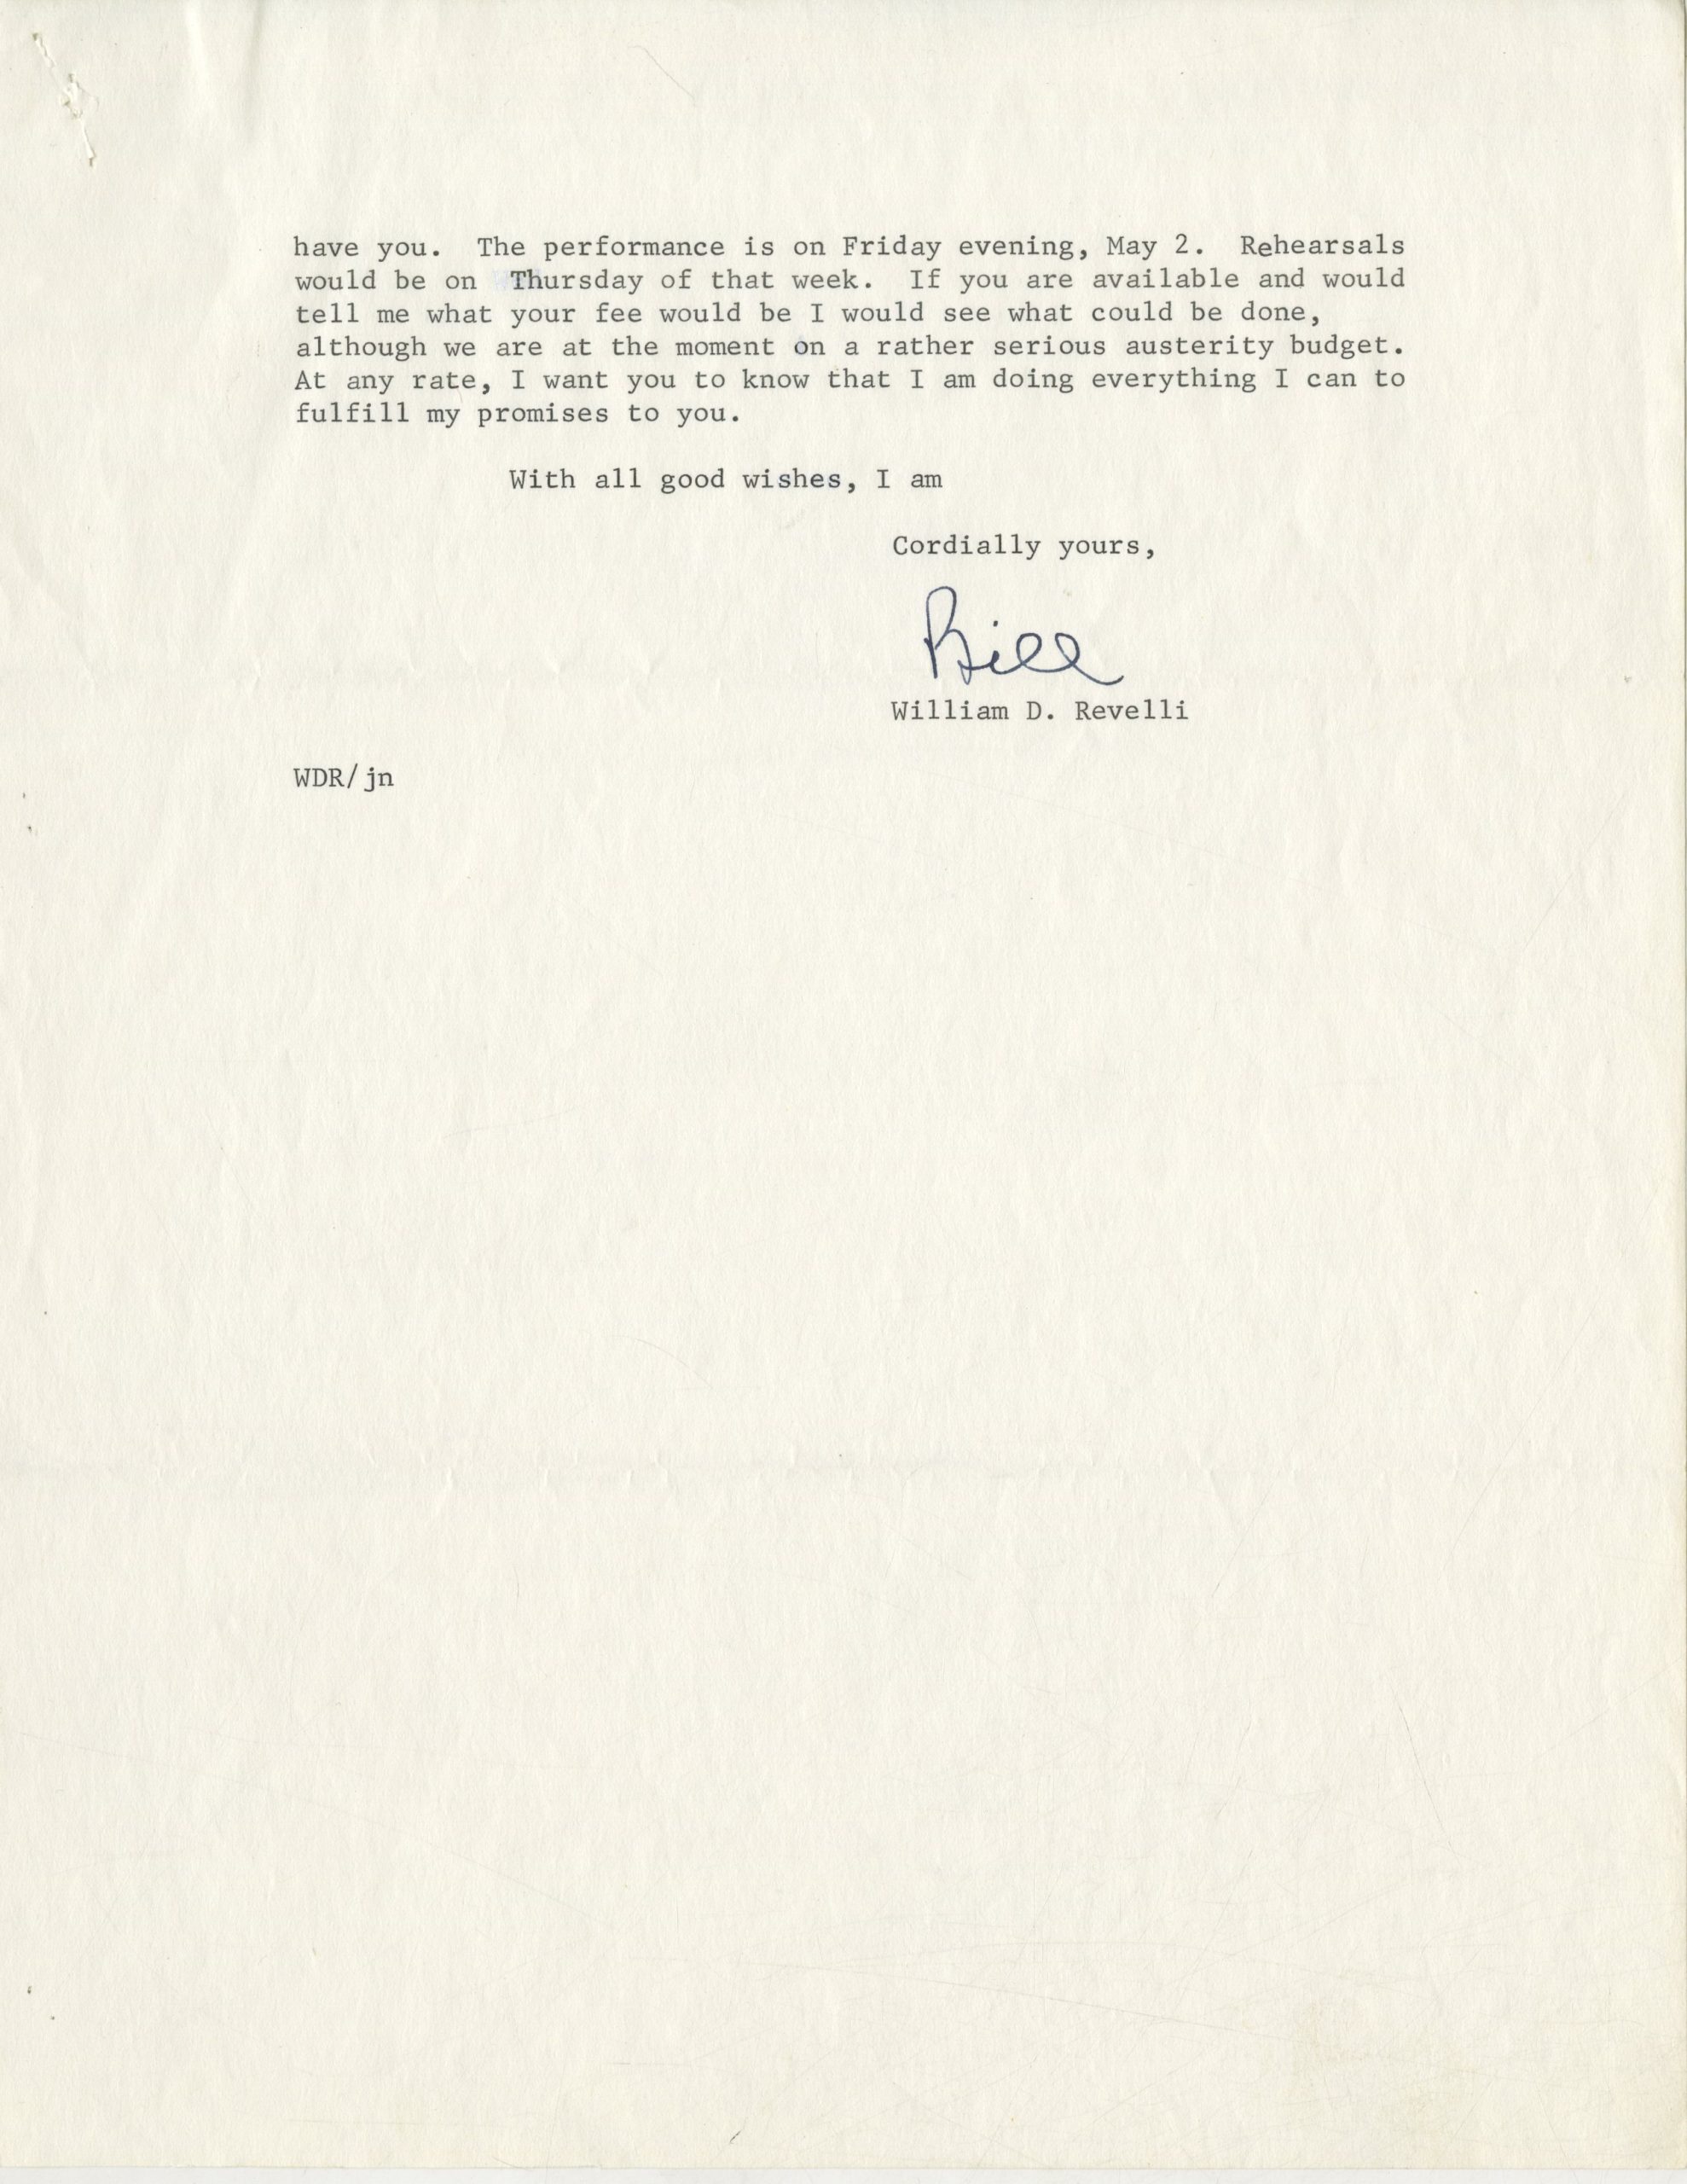 April 1969 letter from William Revelli (page 2).